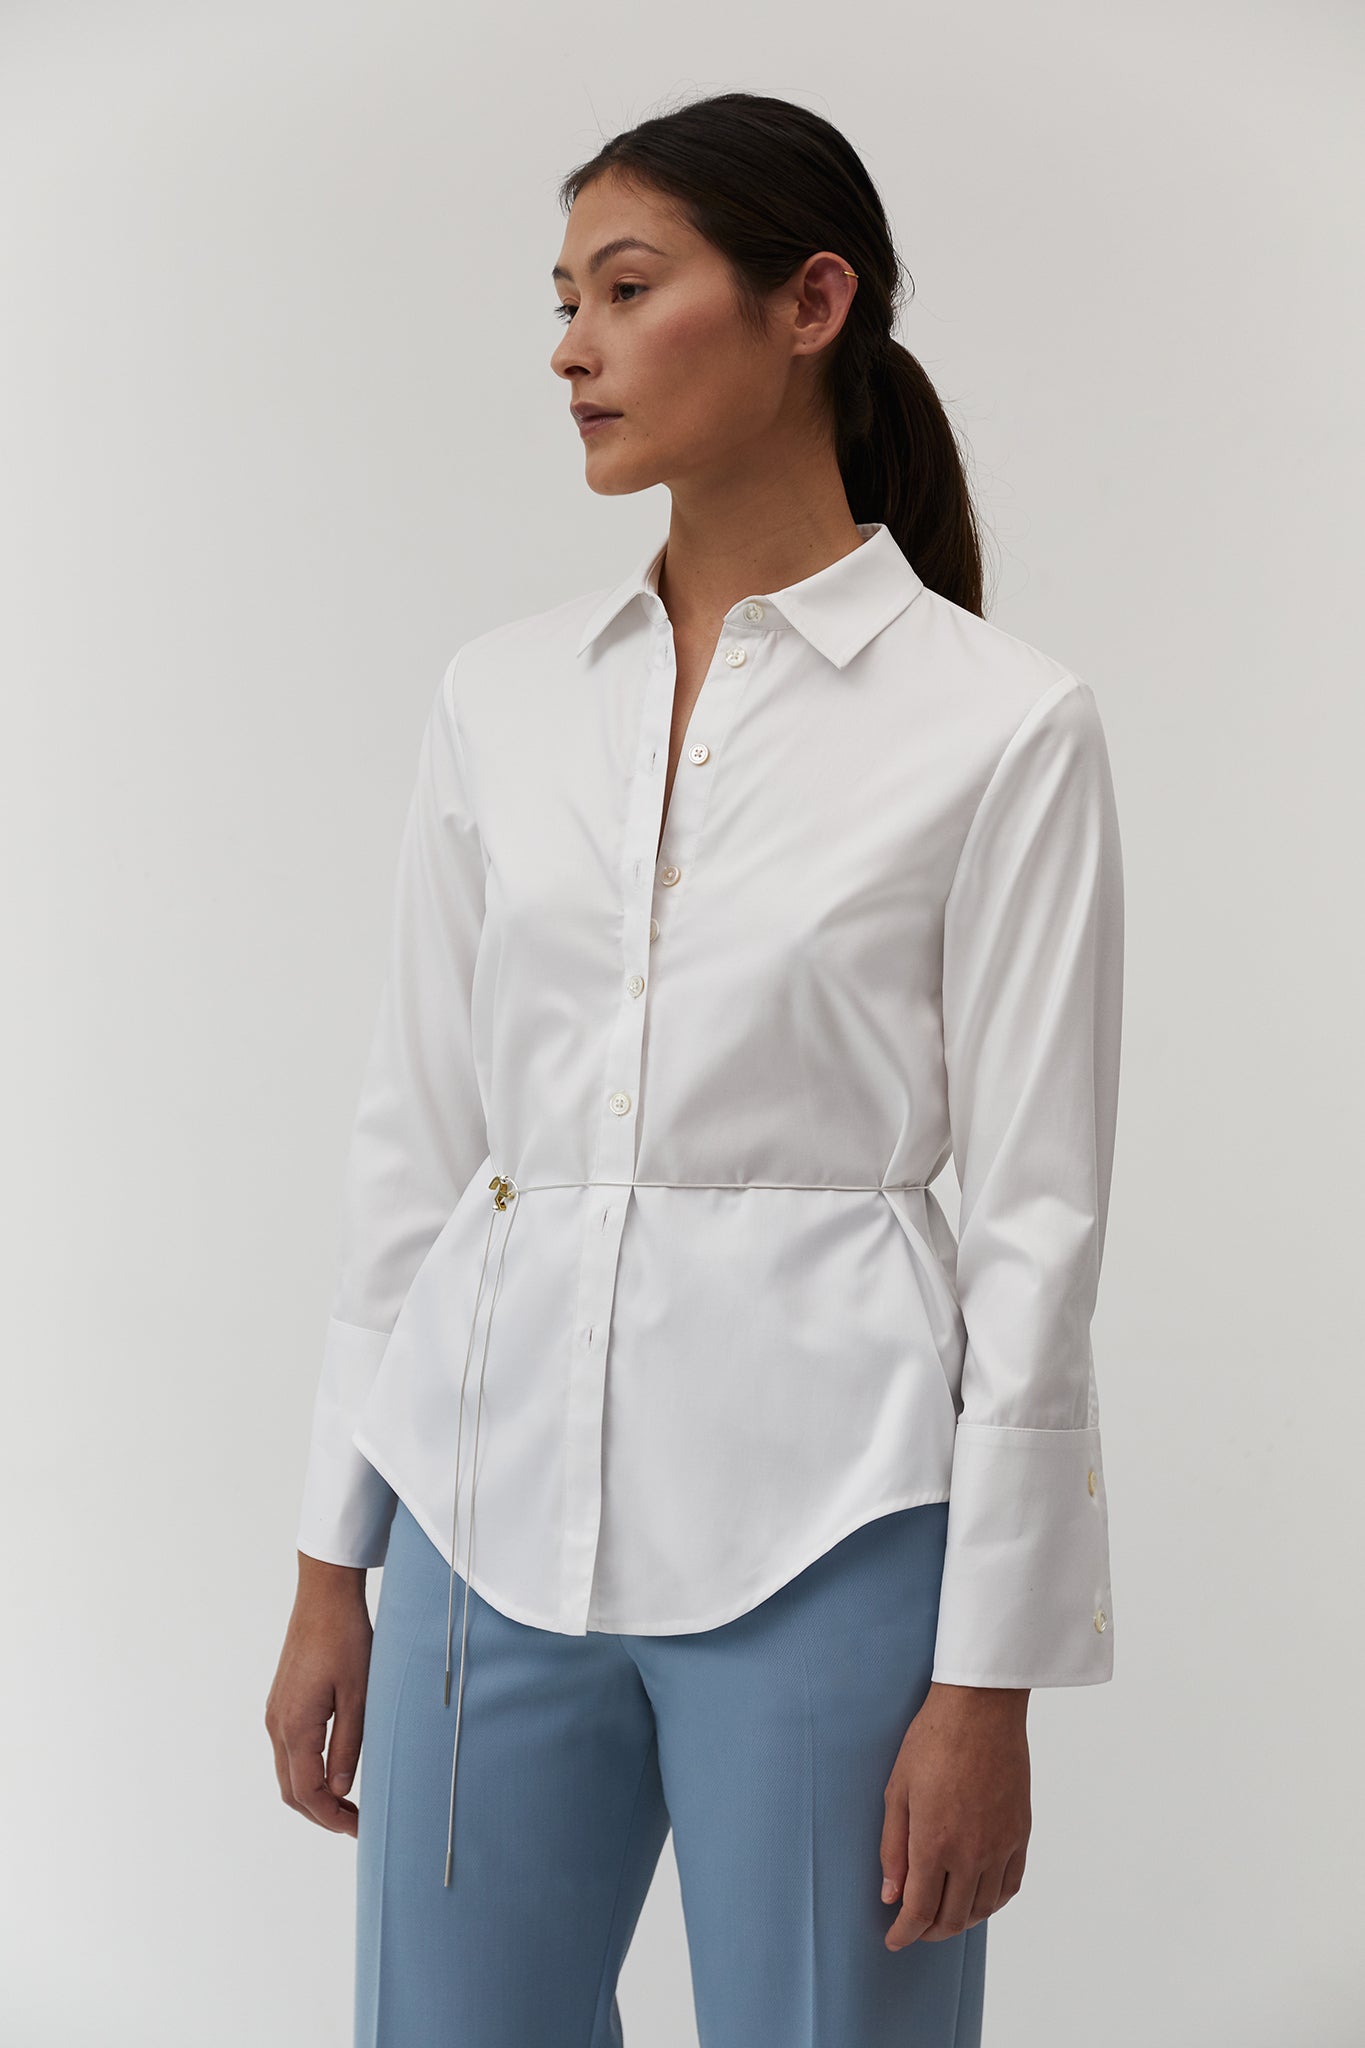 Signature Shirt in Journey Twill Cotton Shirting – The Array